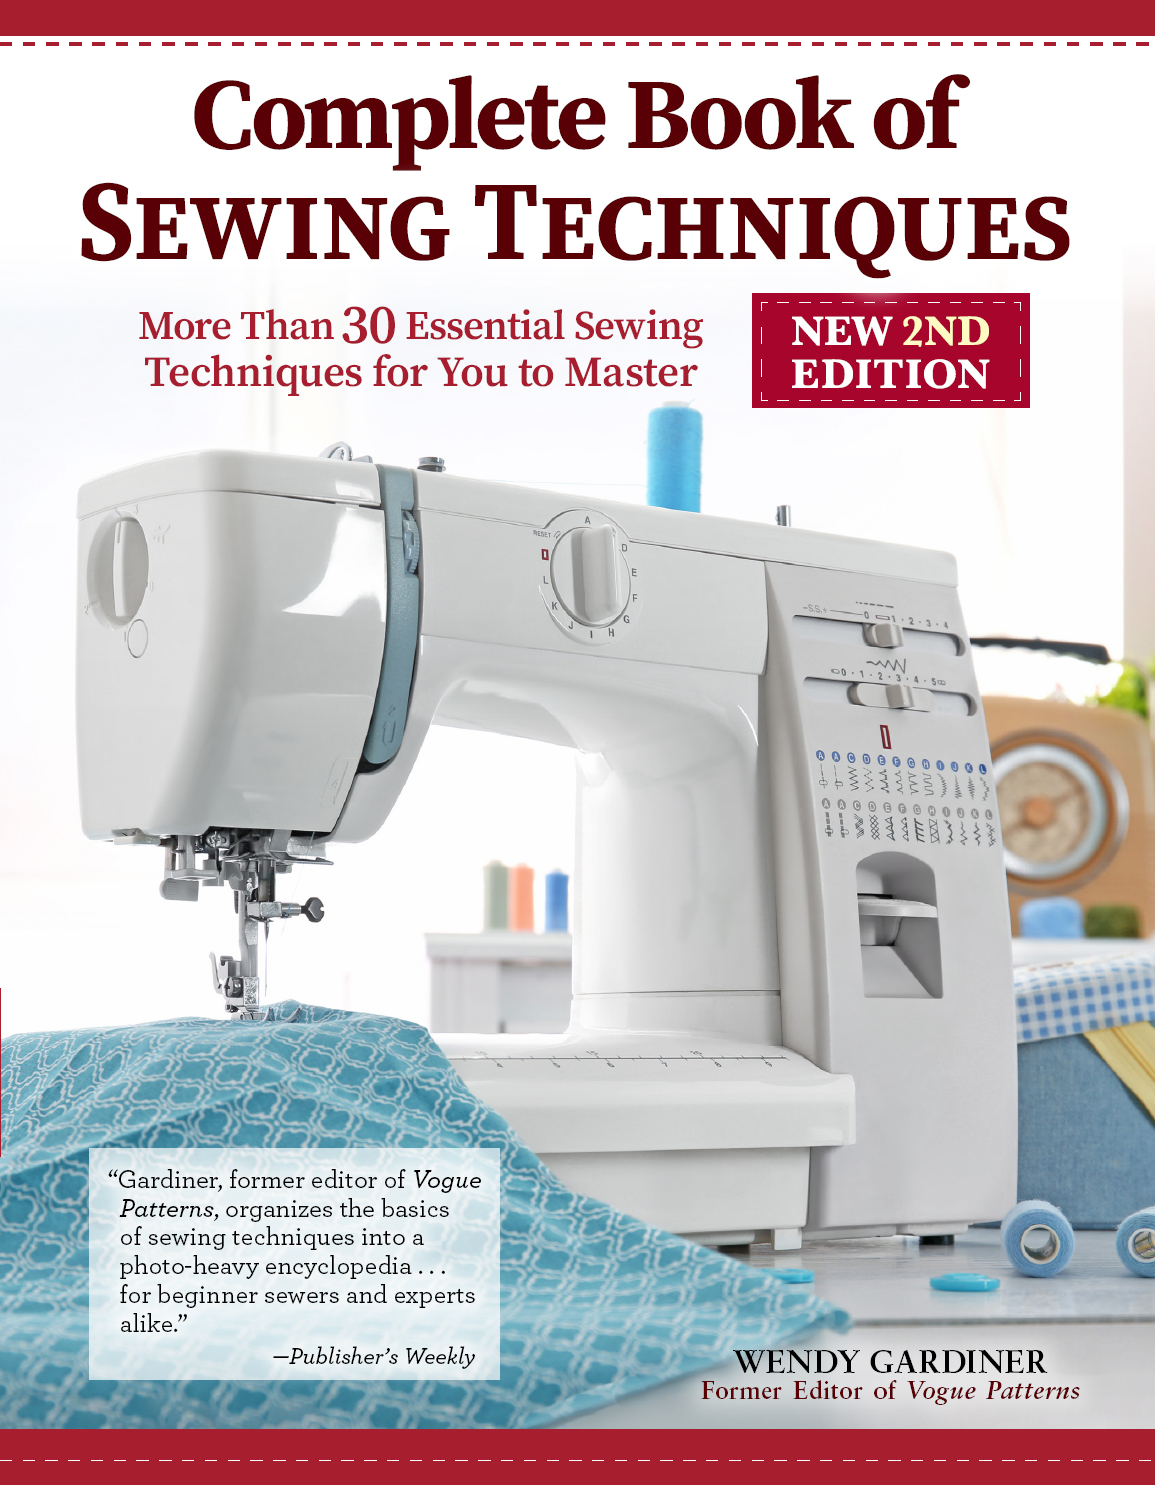 COMPLETE BOOK OF SEWING TECHNIQUES NEW 2ND EDITION Landauer Publishing - photo 1